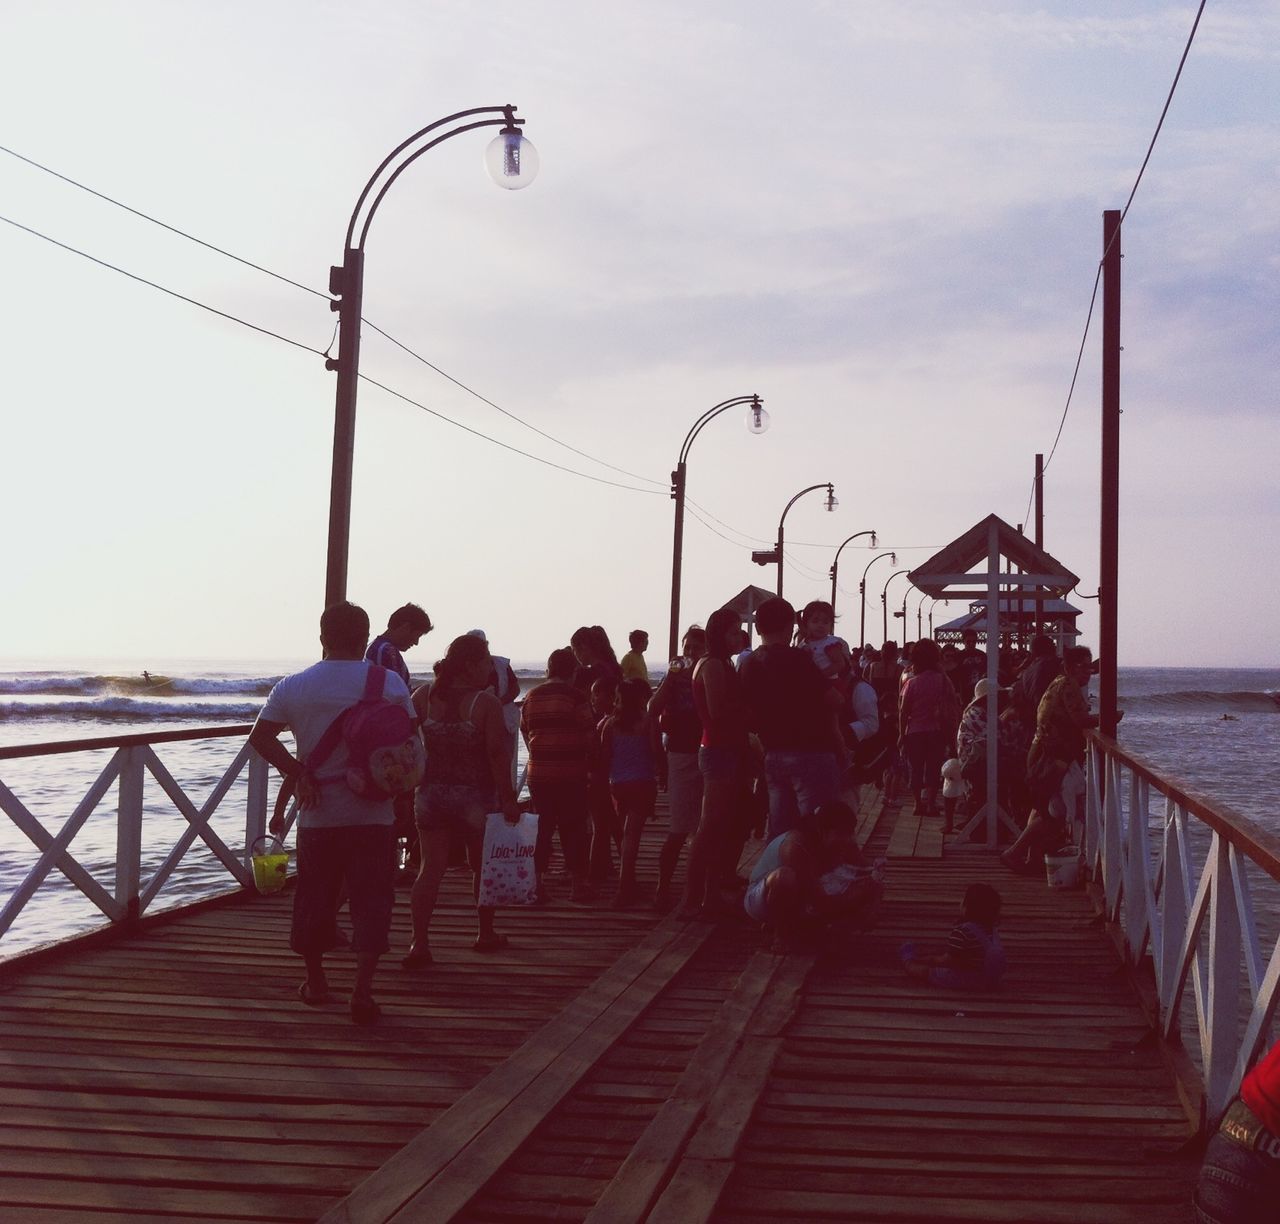 men, lifestyles, railing, leisure activity, water, person, sky, togetherness, full length, pier, rear view, sea, connection, built structure, walking, medium group of people, bonding, the way forward